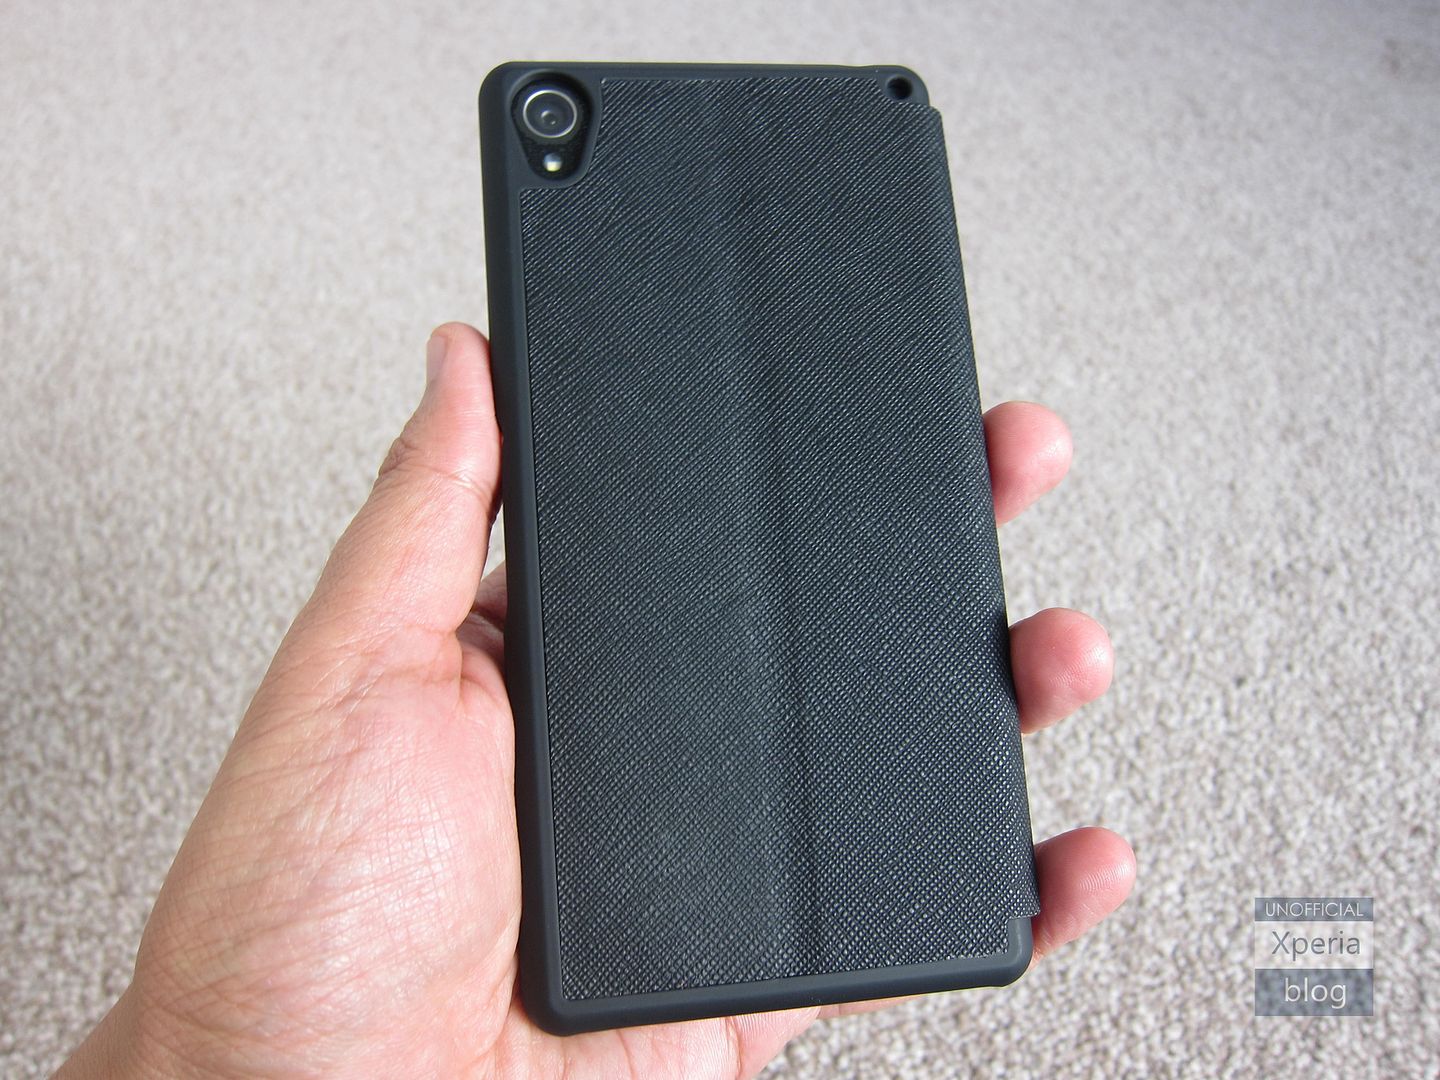 Case-Mate Stand Folio for Xperia Z3 Review